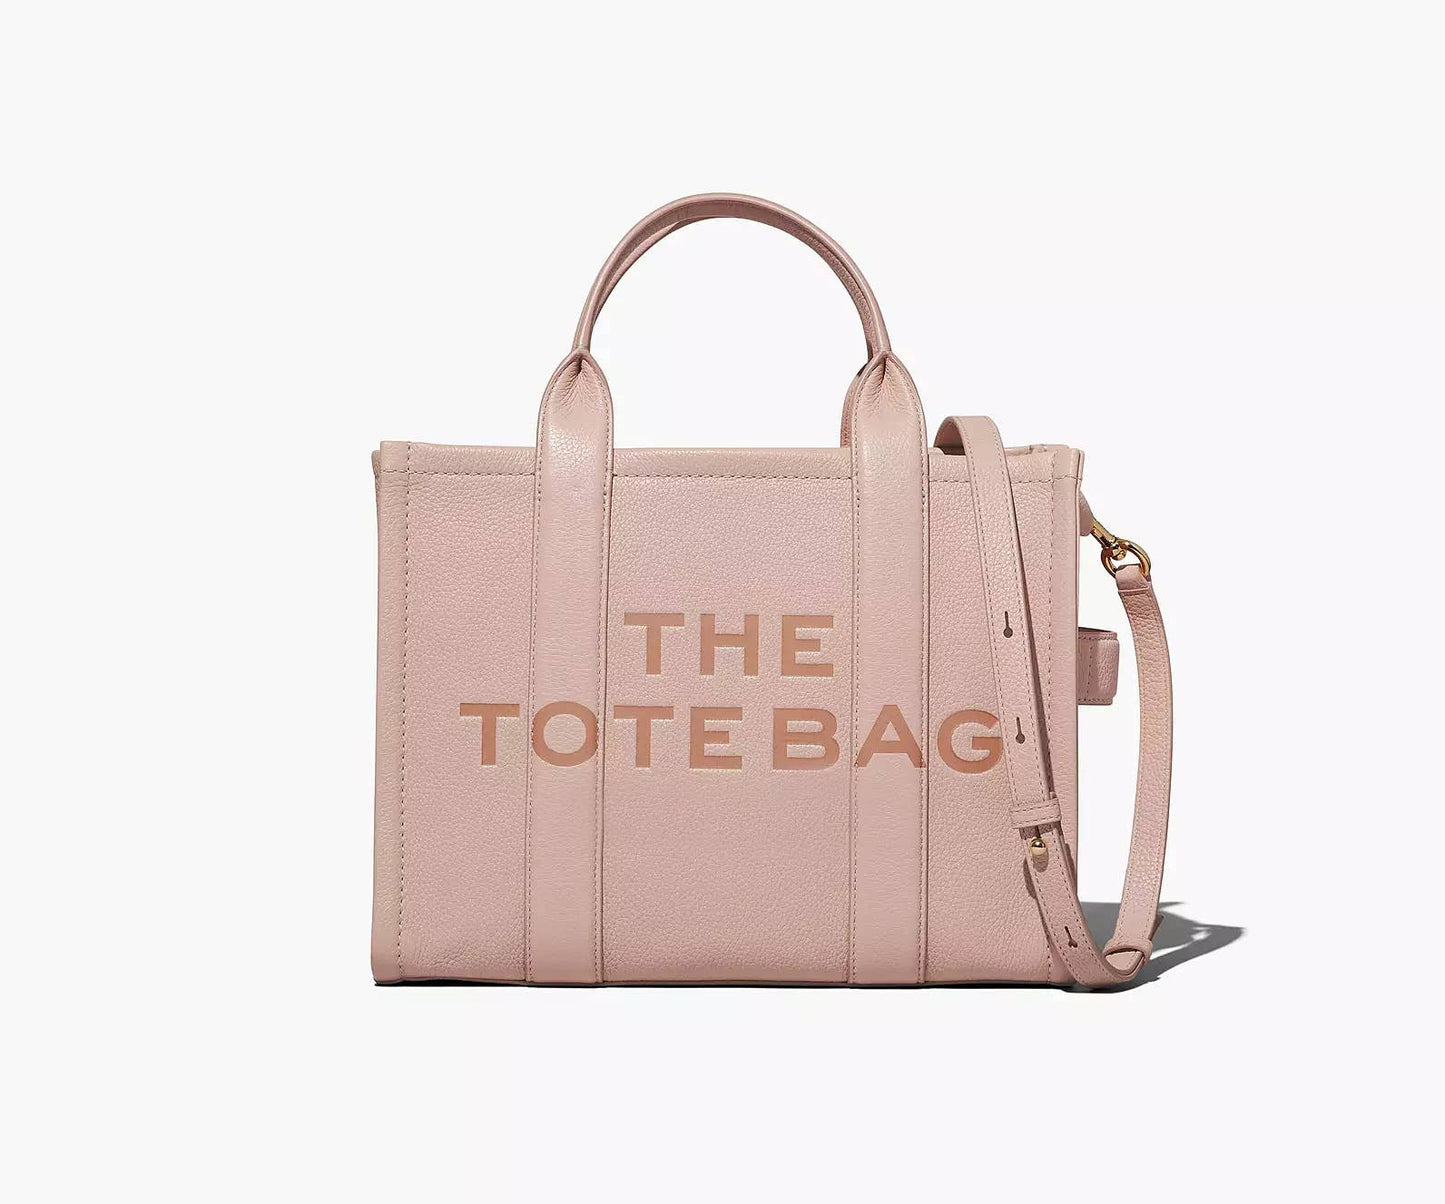 Women's handbag leather tote bag with Zipper: One size / powder pink